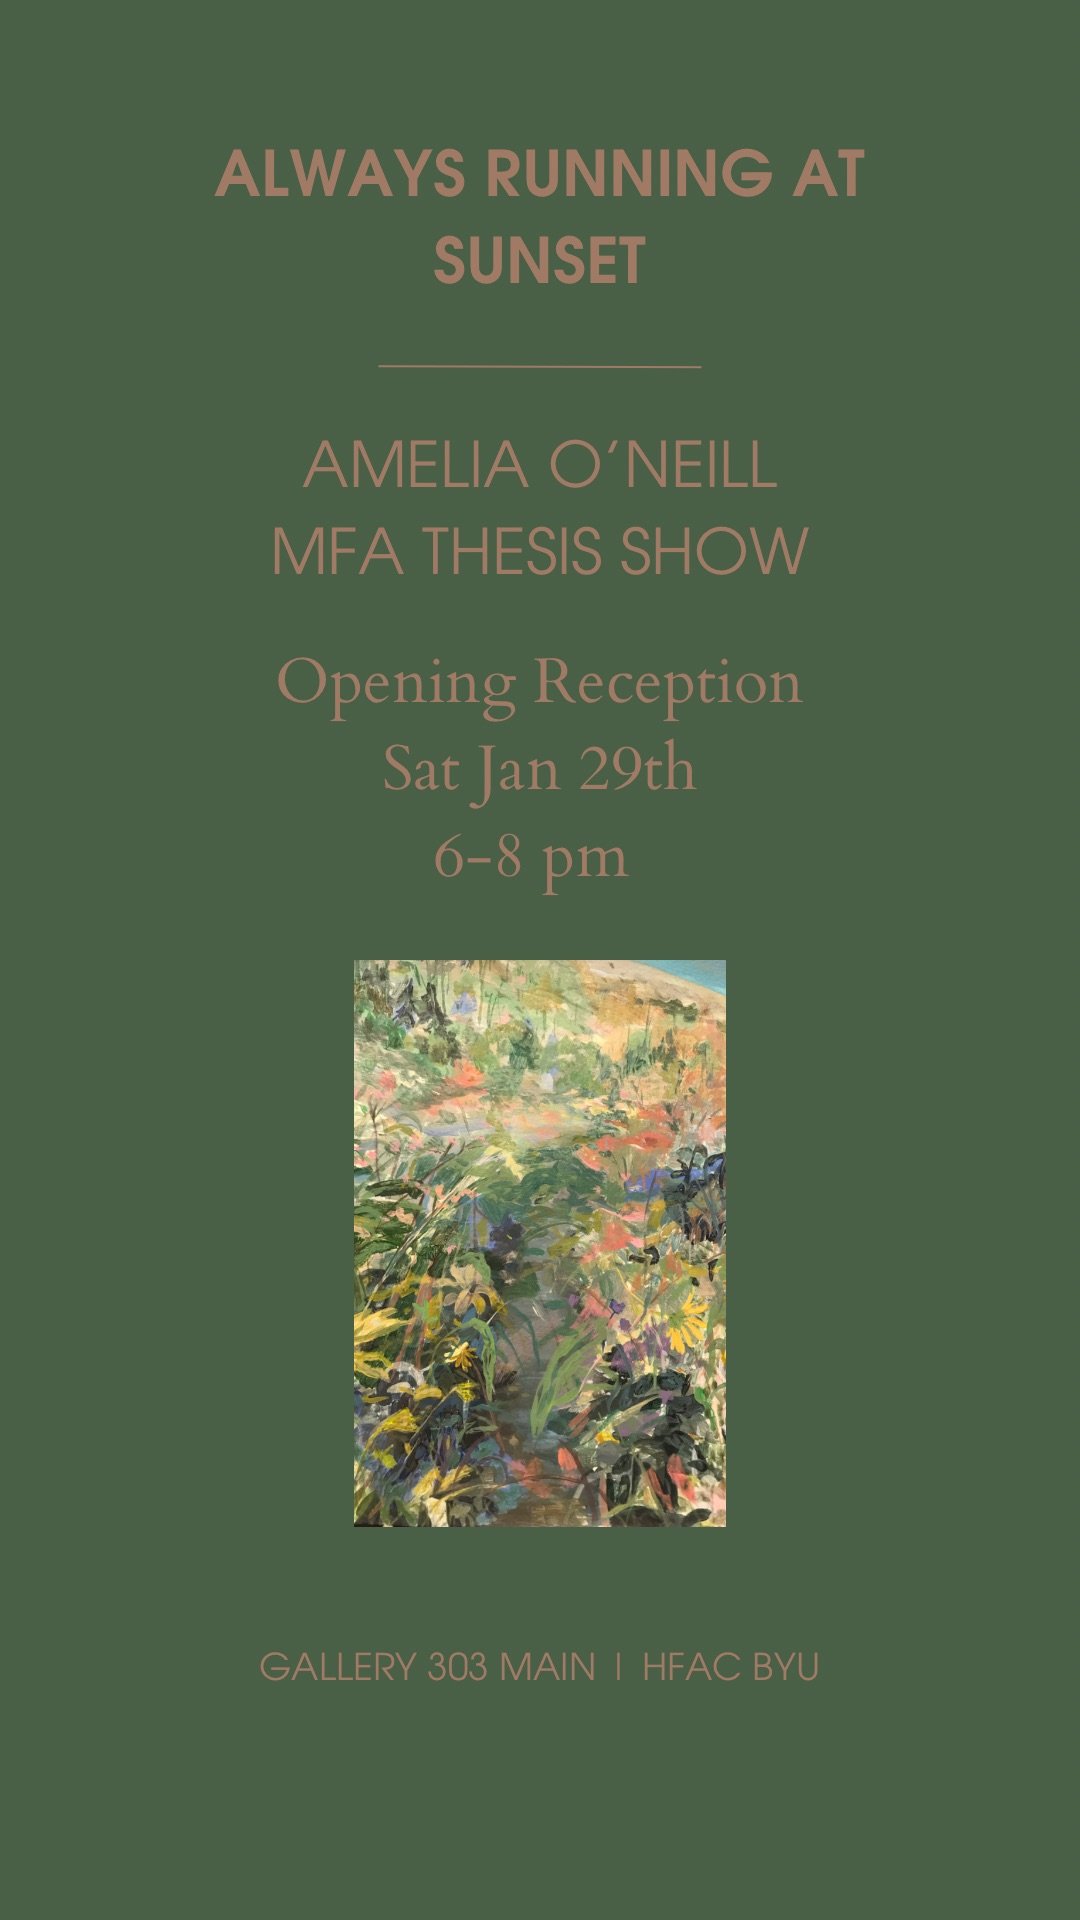 The following images are from Amelia O'Neill's MFA Thesis Show